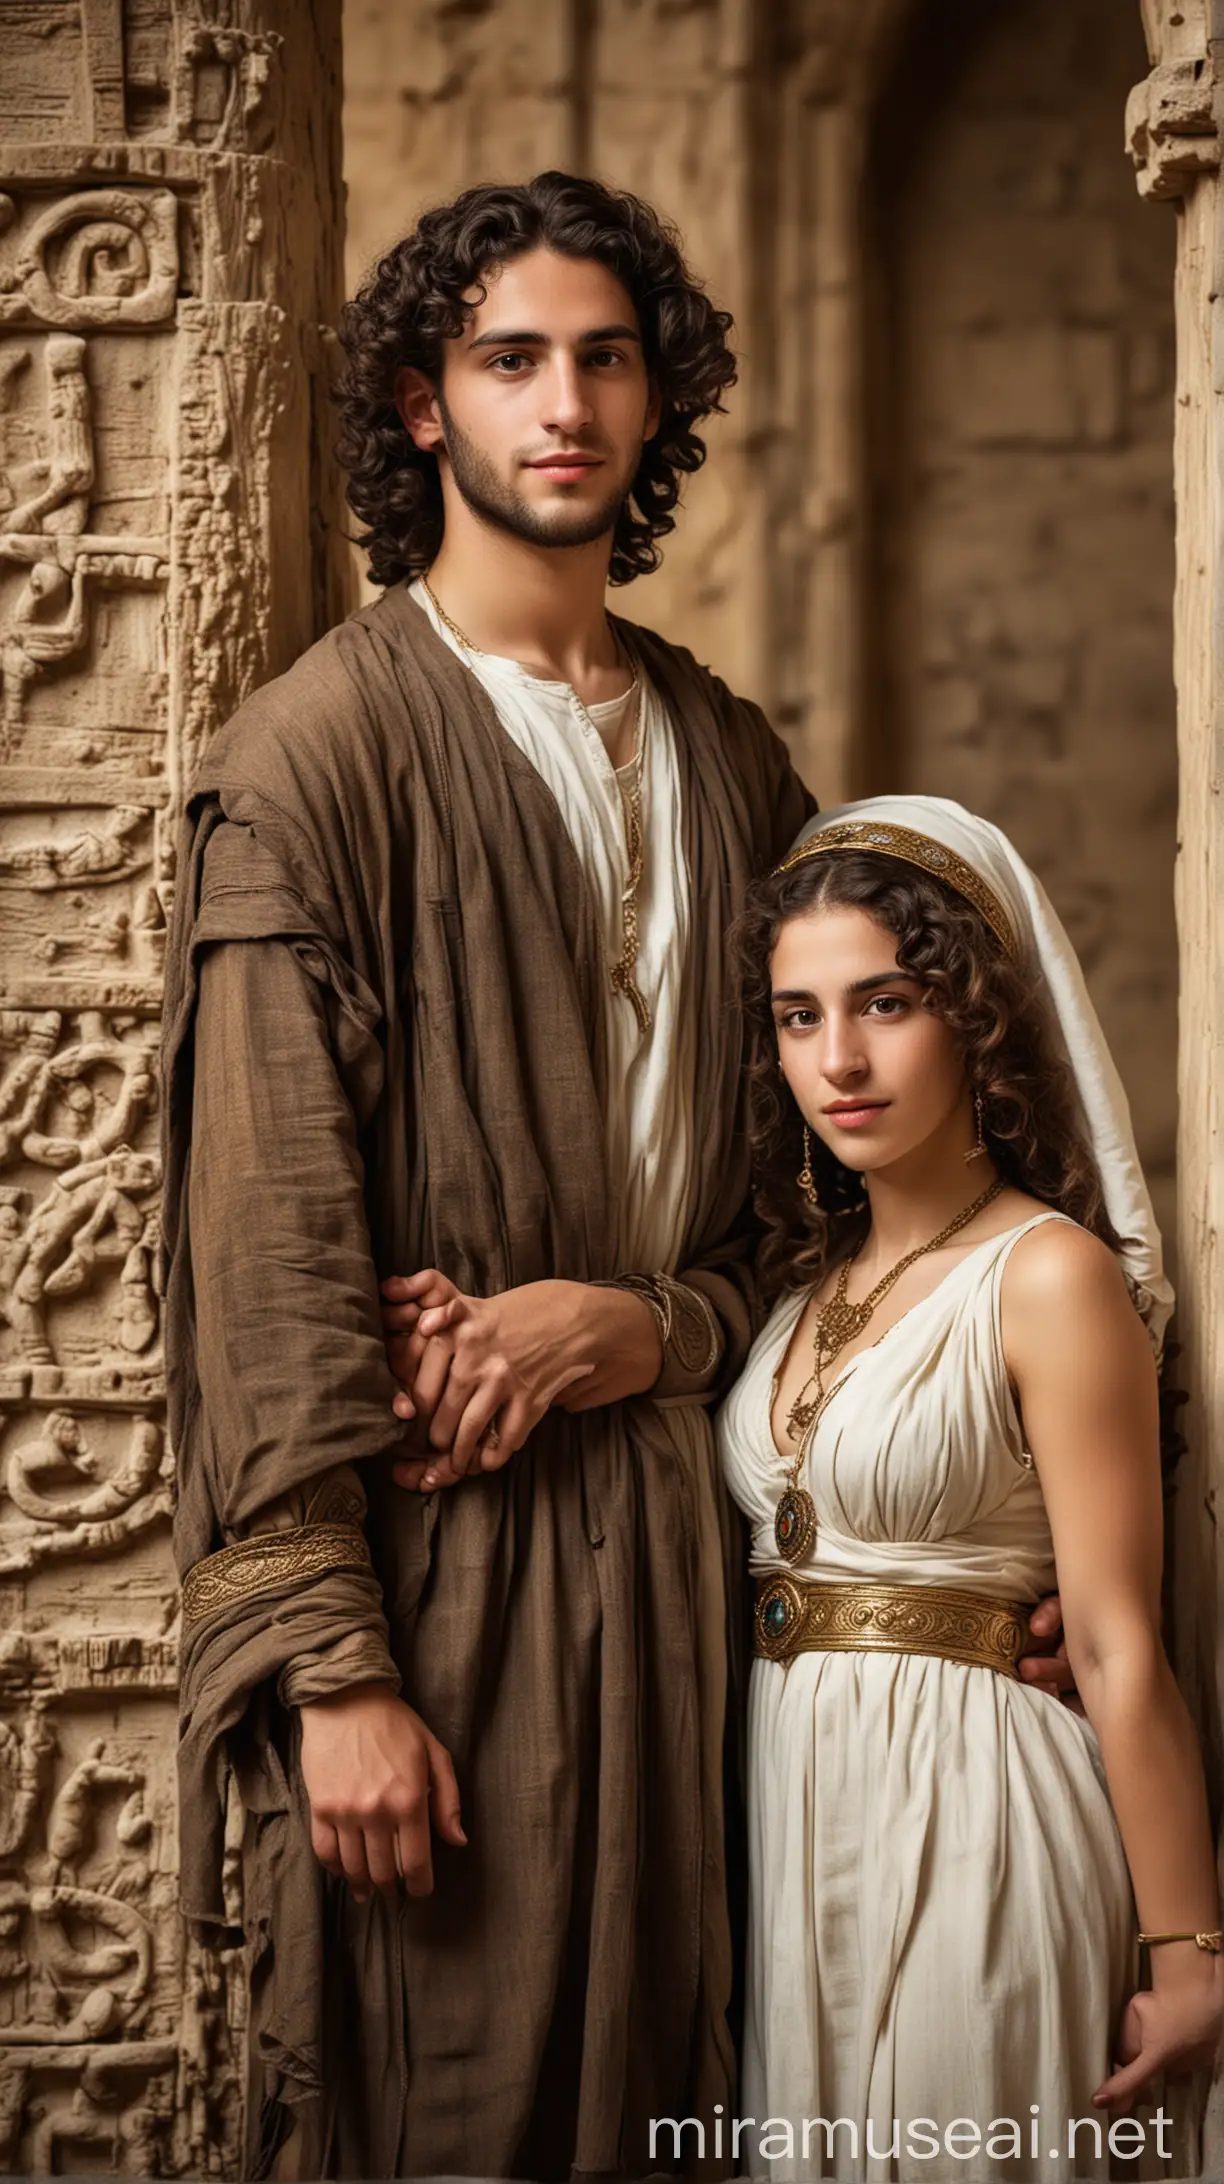 Fine Young Jewish Couple in Ancient World